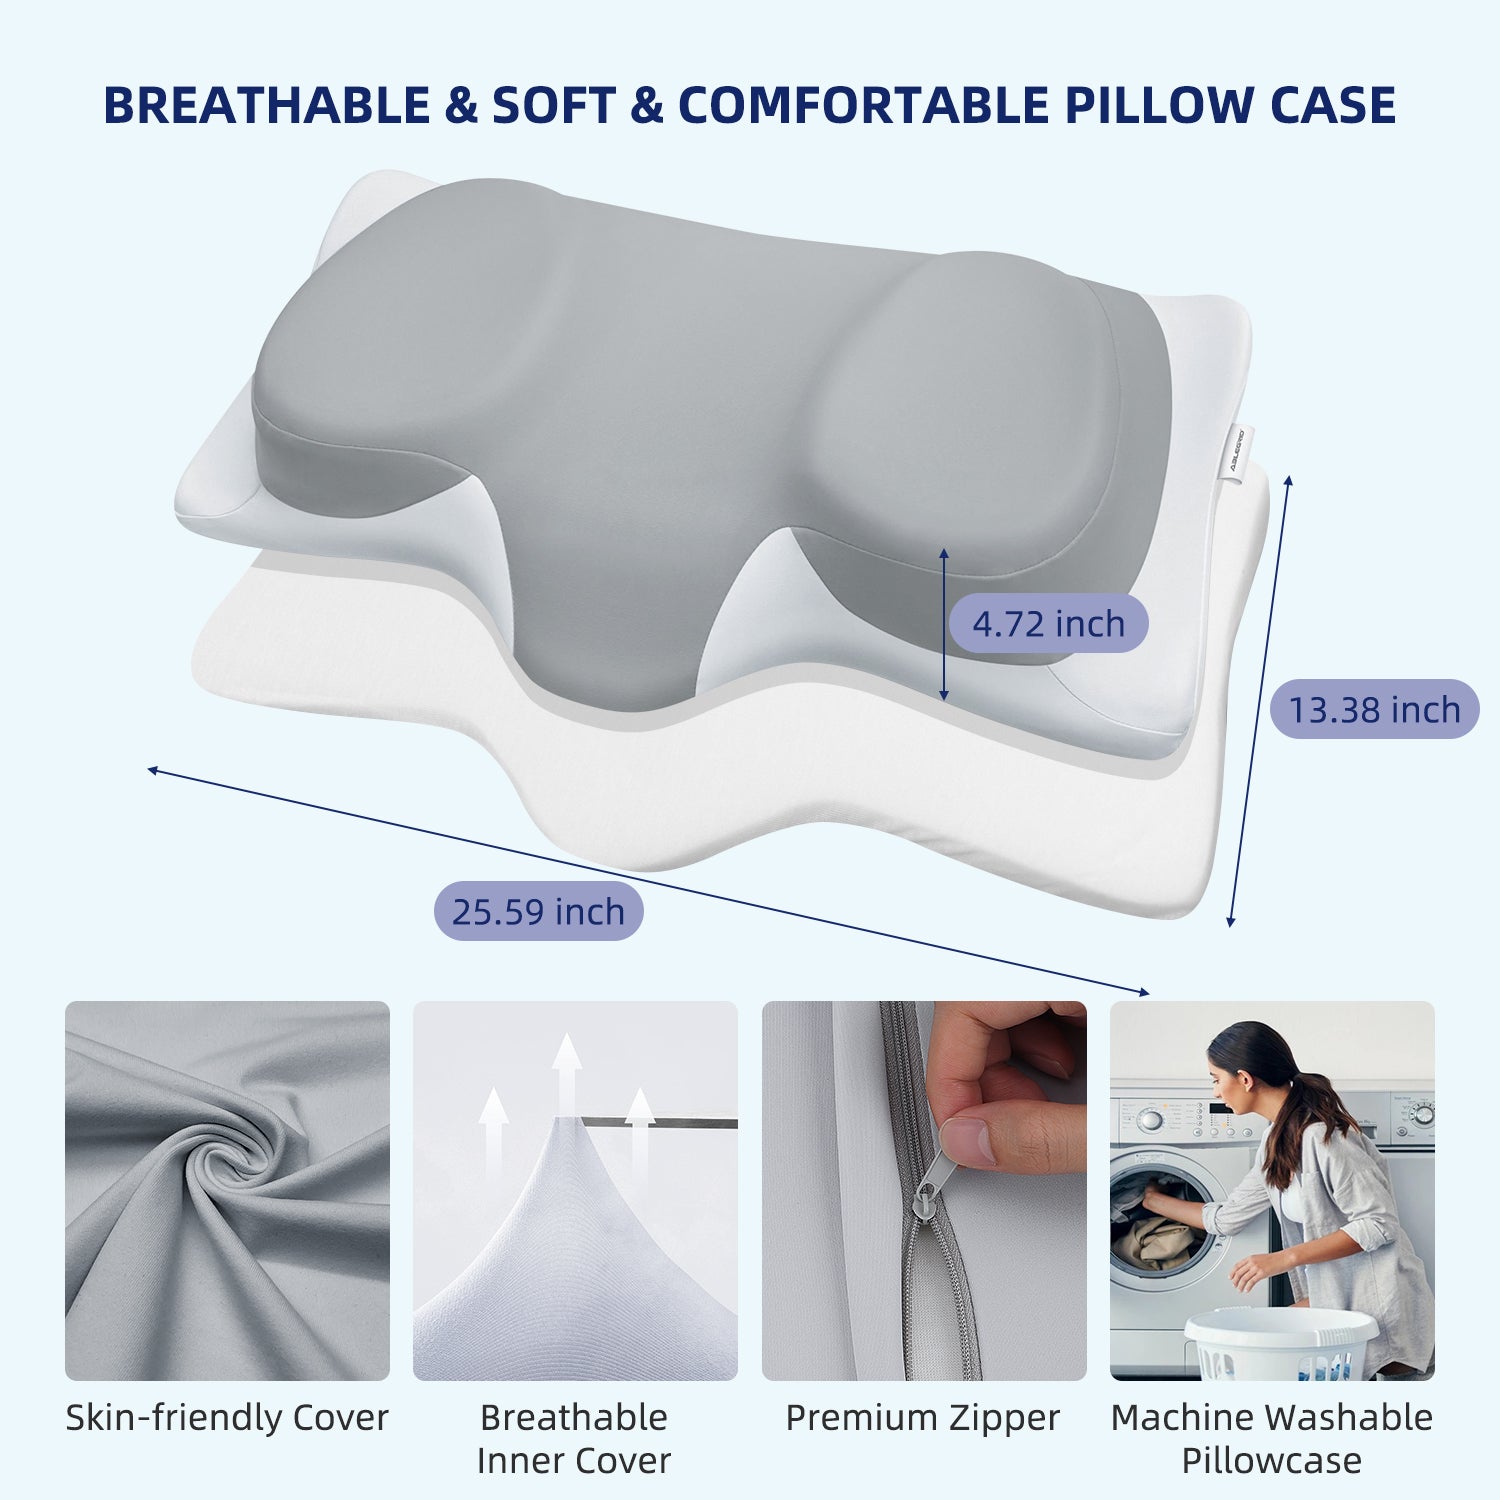 ABLEGRID Cervical Neck Pillow Memory Foam Pillow for Shoulder Pain Relief, Contour Sleeping Support Pillow, Ergonomic Bed Pillow, Orthopedic Neck Back Pillow for Side Stomach Sleeper,Soft & Breathable